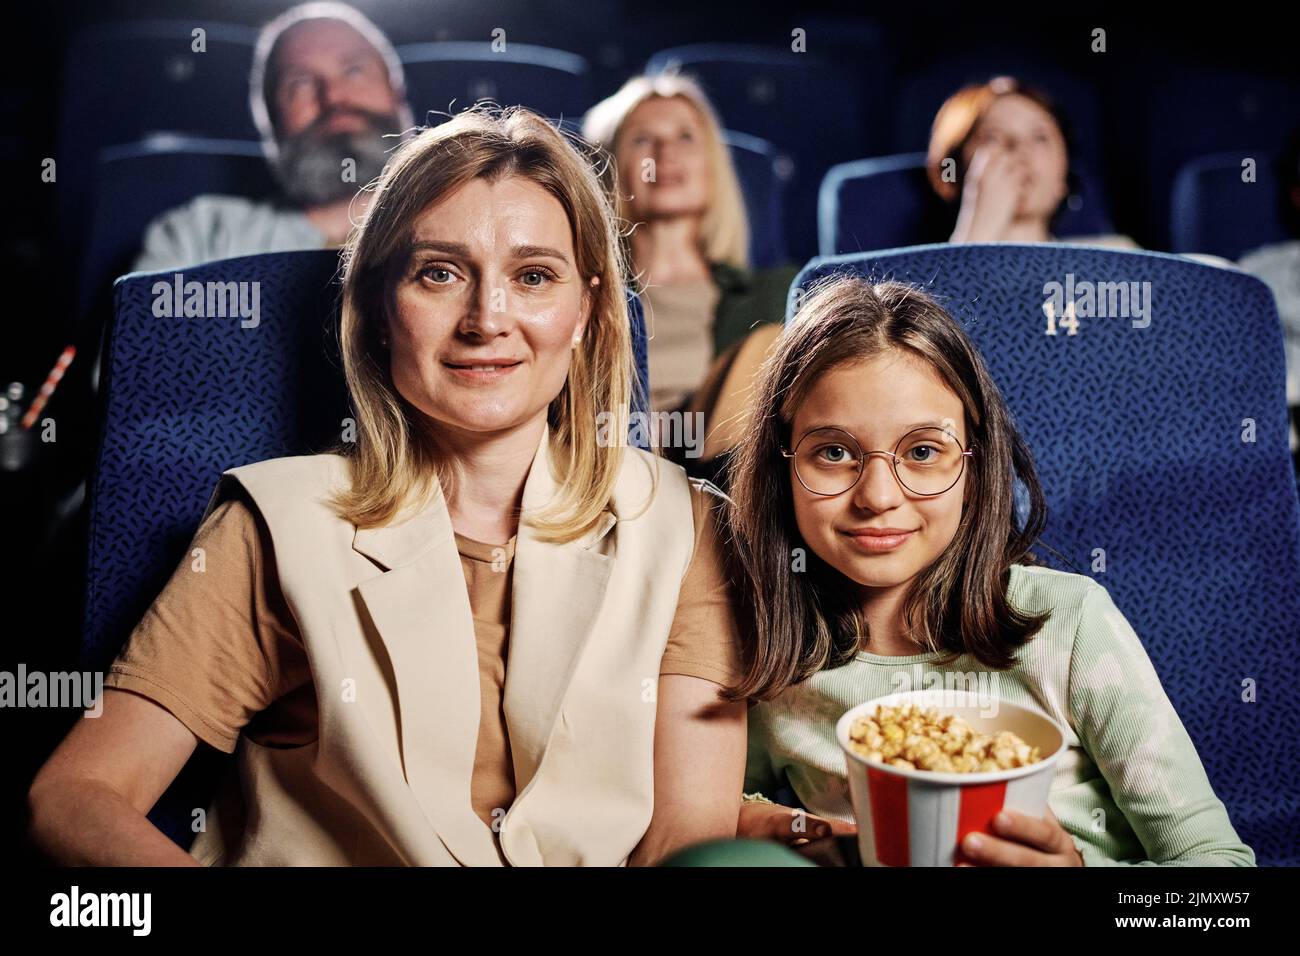 Horizontal medium portrait of joyful Caucasian mother and daughter spending time together sitting at cinema looking at camera Stock Photo